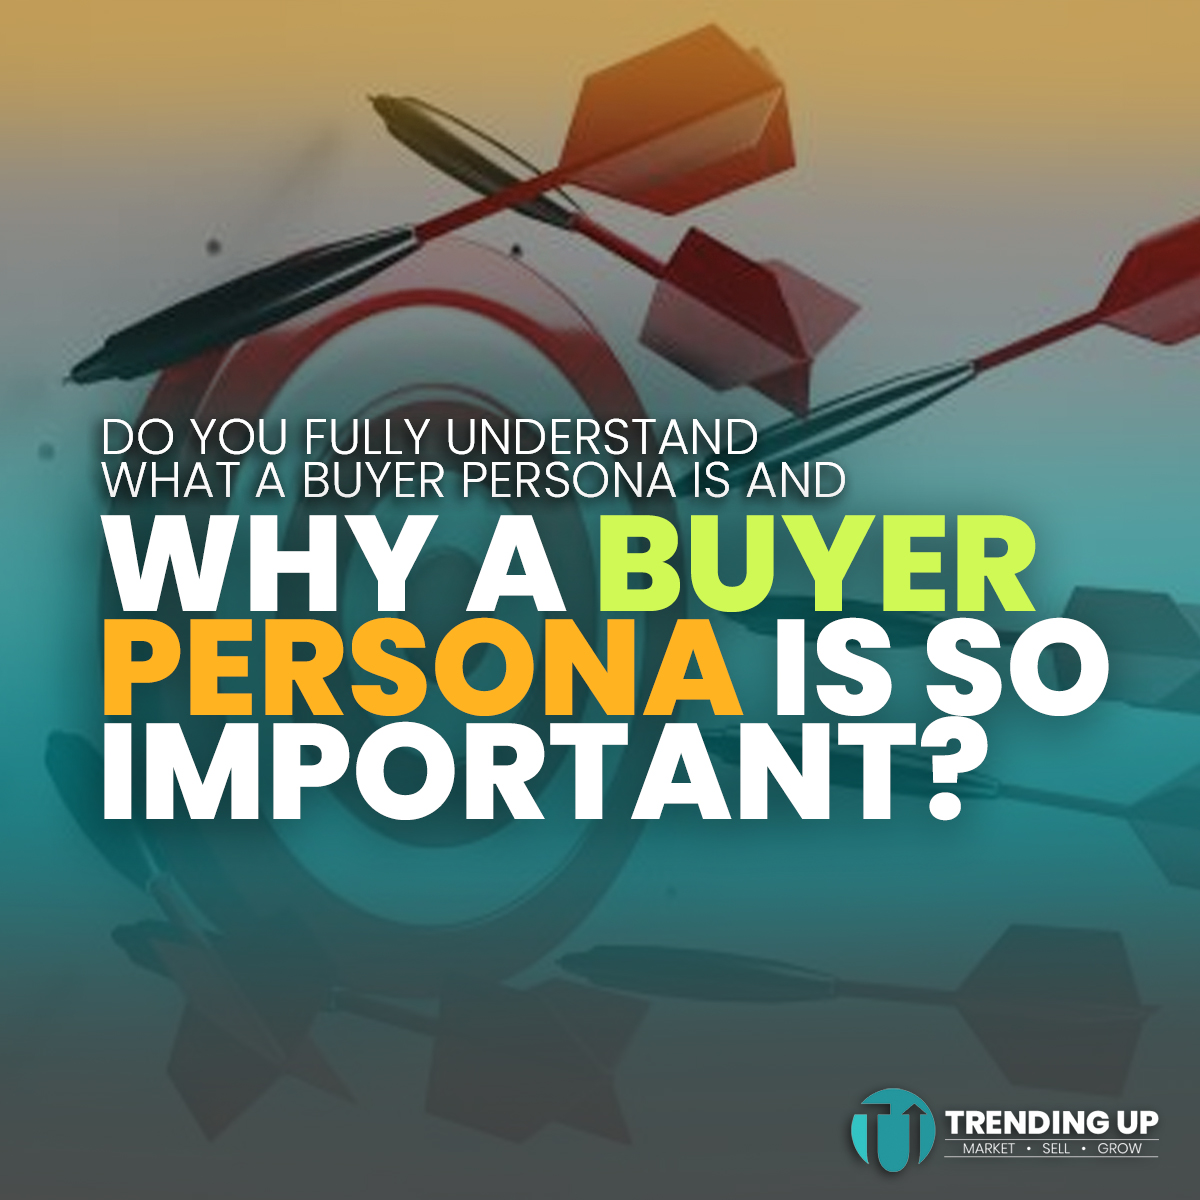 Do you fully understand what a Buyer Persona is and why it is so important? #marketingformanufacturers bit.ly/3QnRsmN
#buyerpersona #buyerpersonas #marketinghelp #marketingideas #marketingtips #manufacturing #targetmarketing